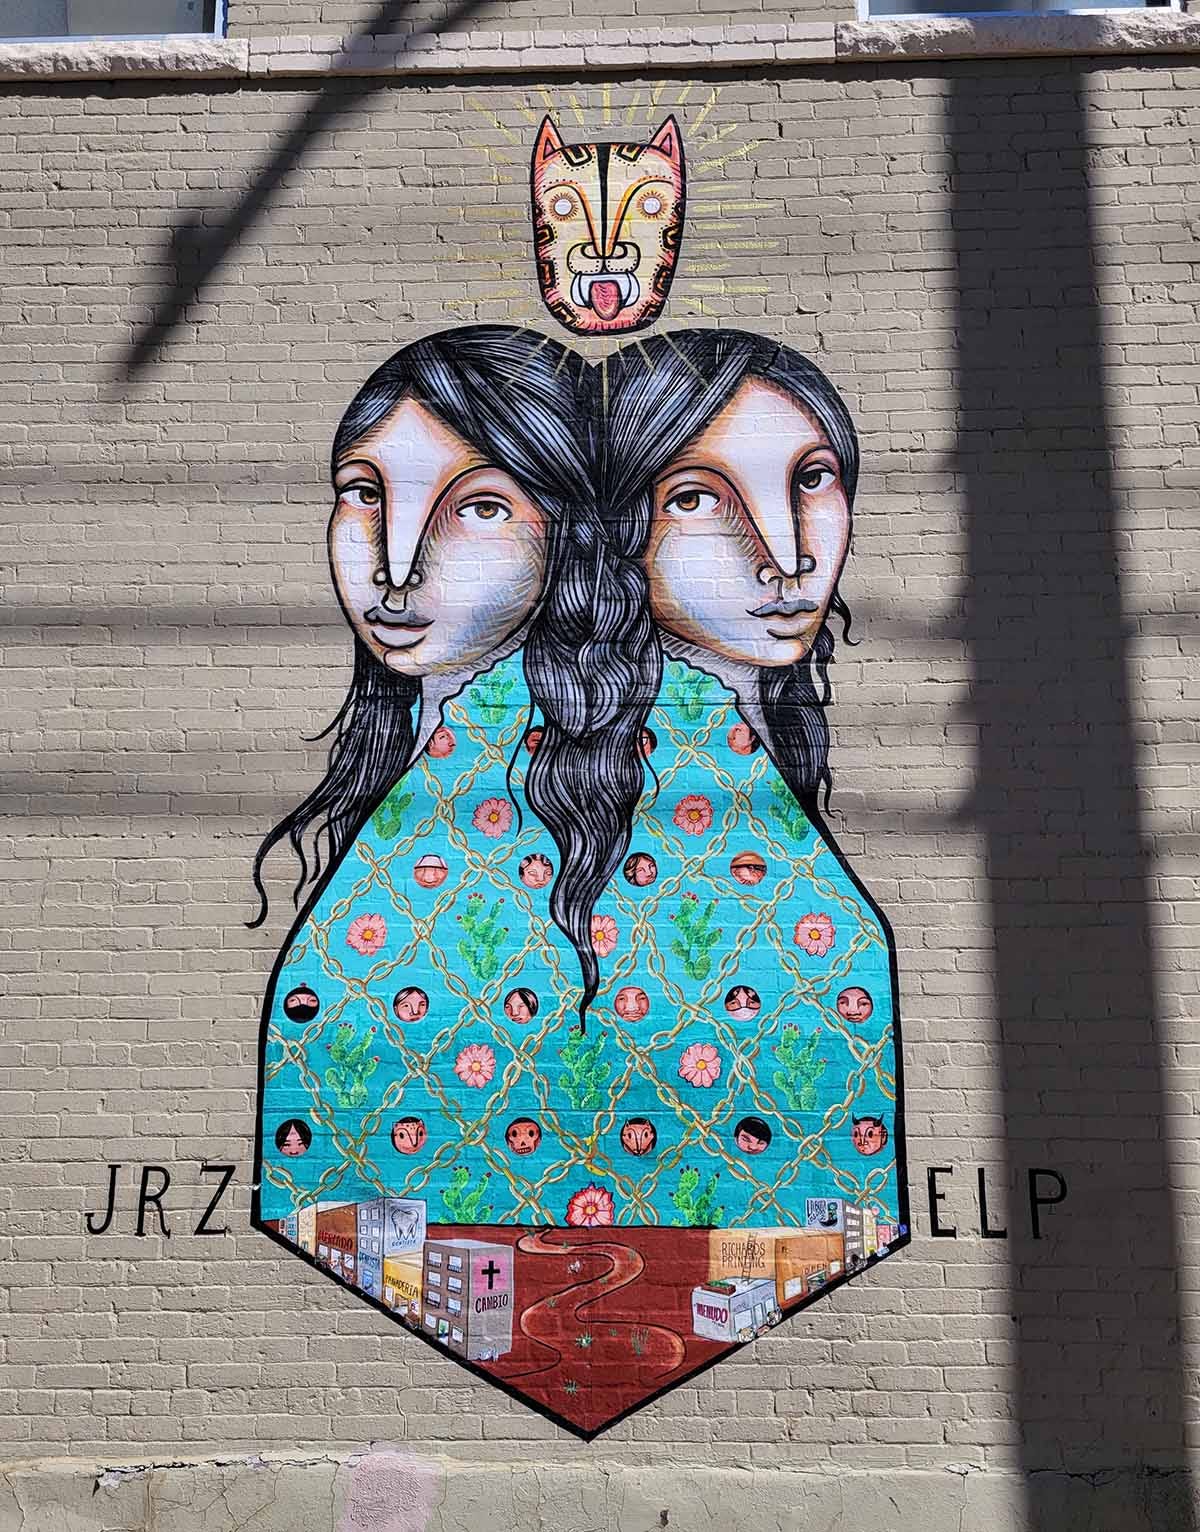 Twin girls in a mural representing the twin cities of El Paso and Juarez.